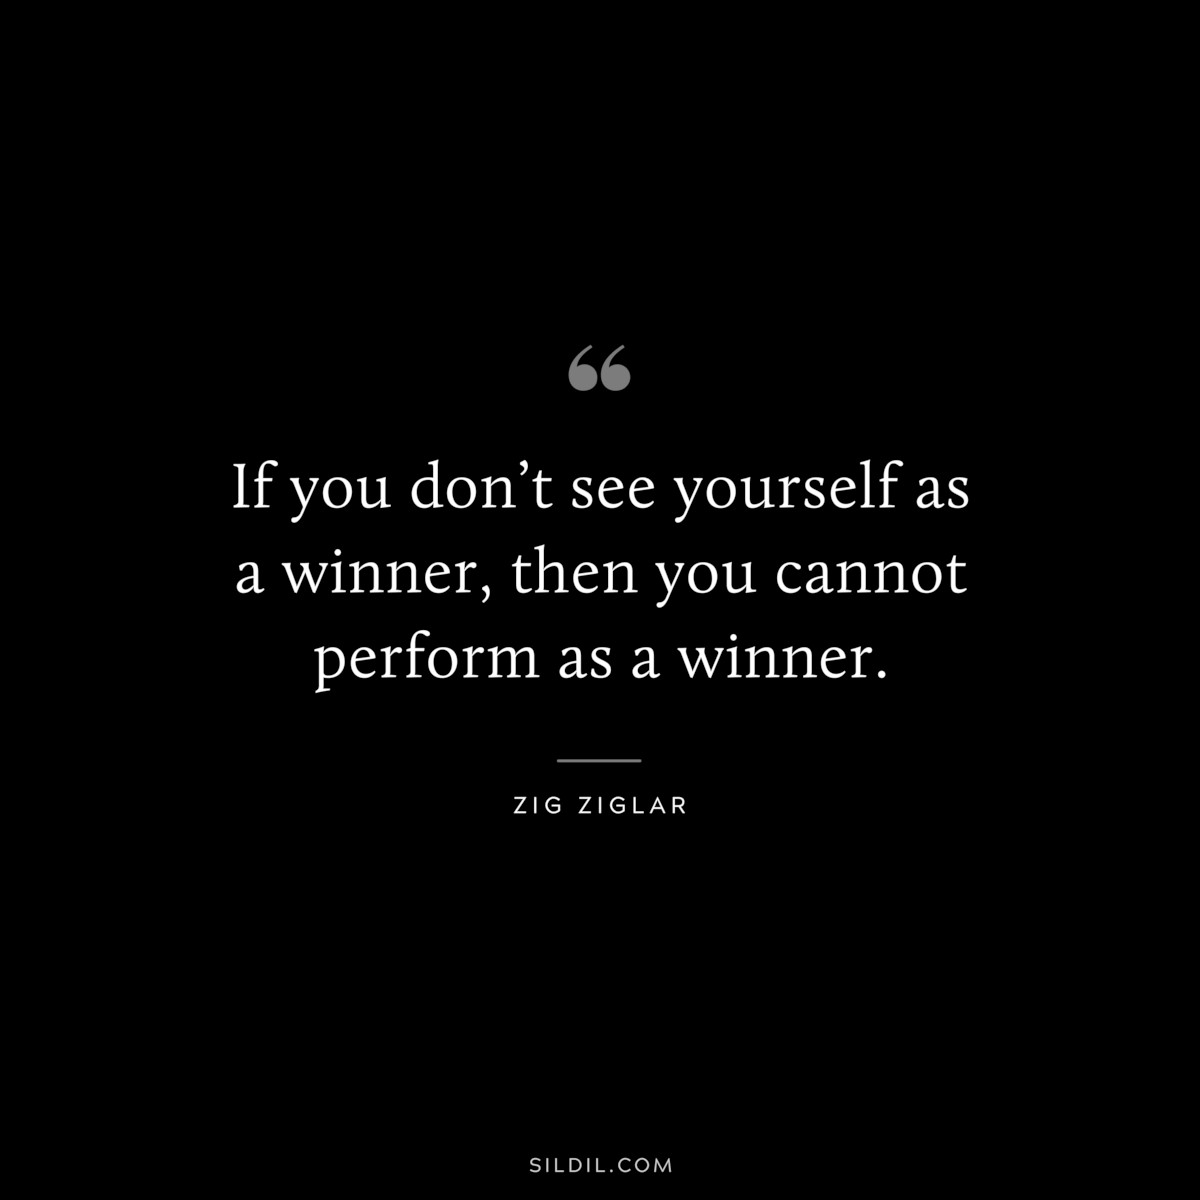 If you don’t see yourself as a winner, then you cannot perform as a winner. ― Zig Ziglar